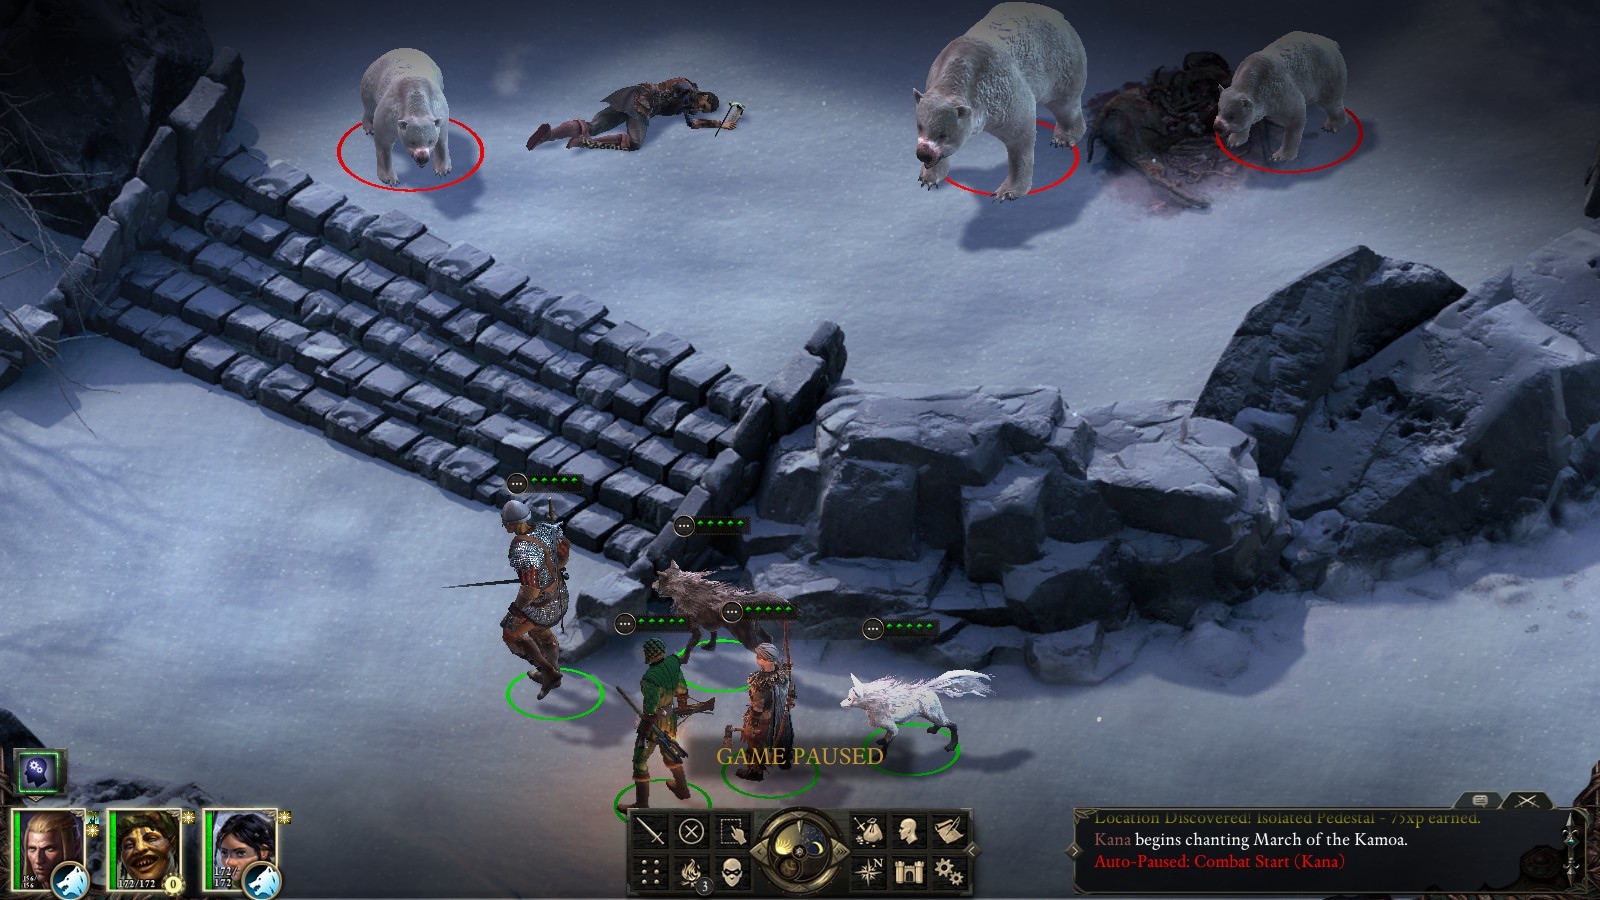 Pillars of Eternity - The White March Tum bud problmy.